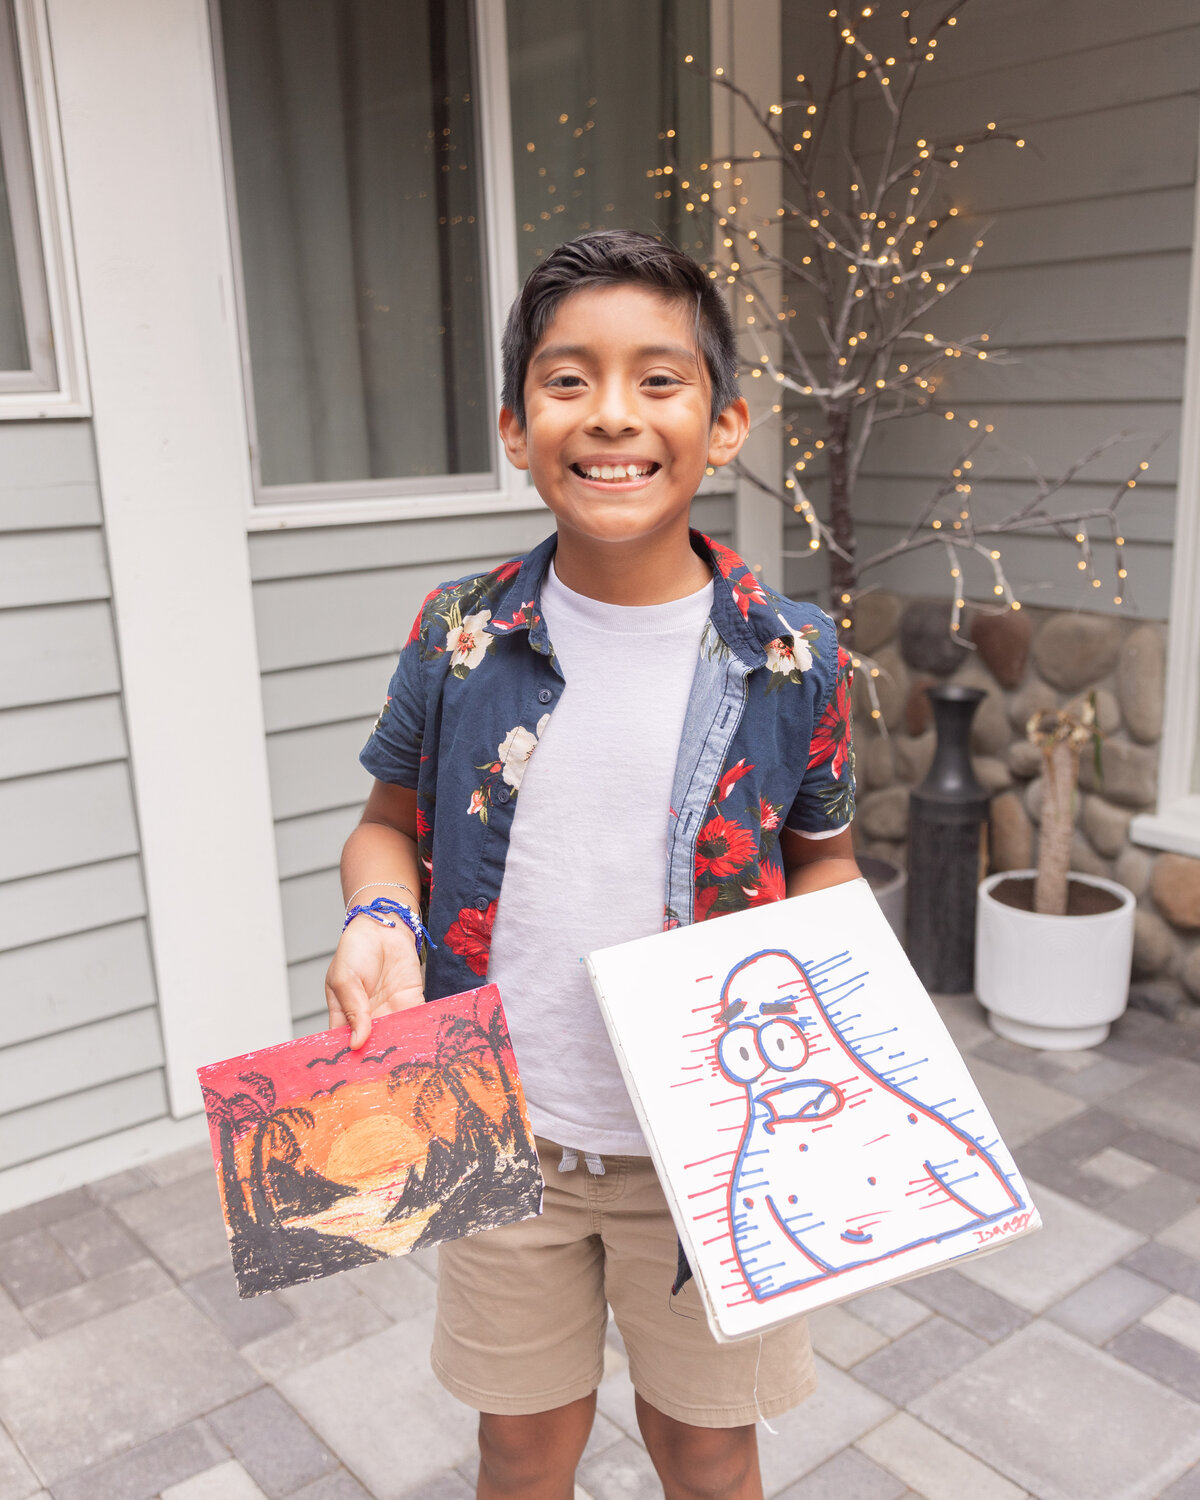 Isaac Flores smiles and holds up drawings he made at his Centralia residence on Tuesday, Sept. 19.